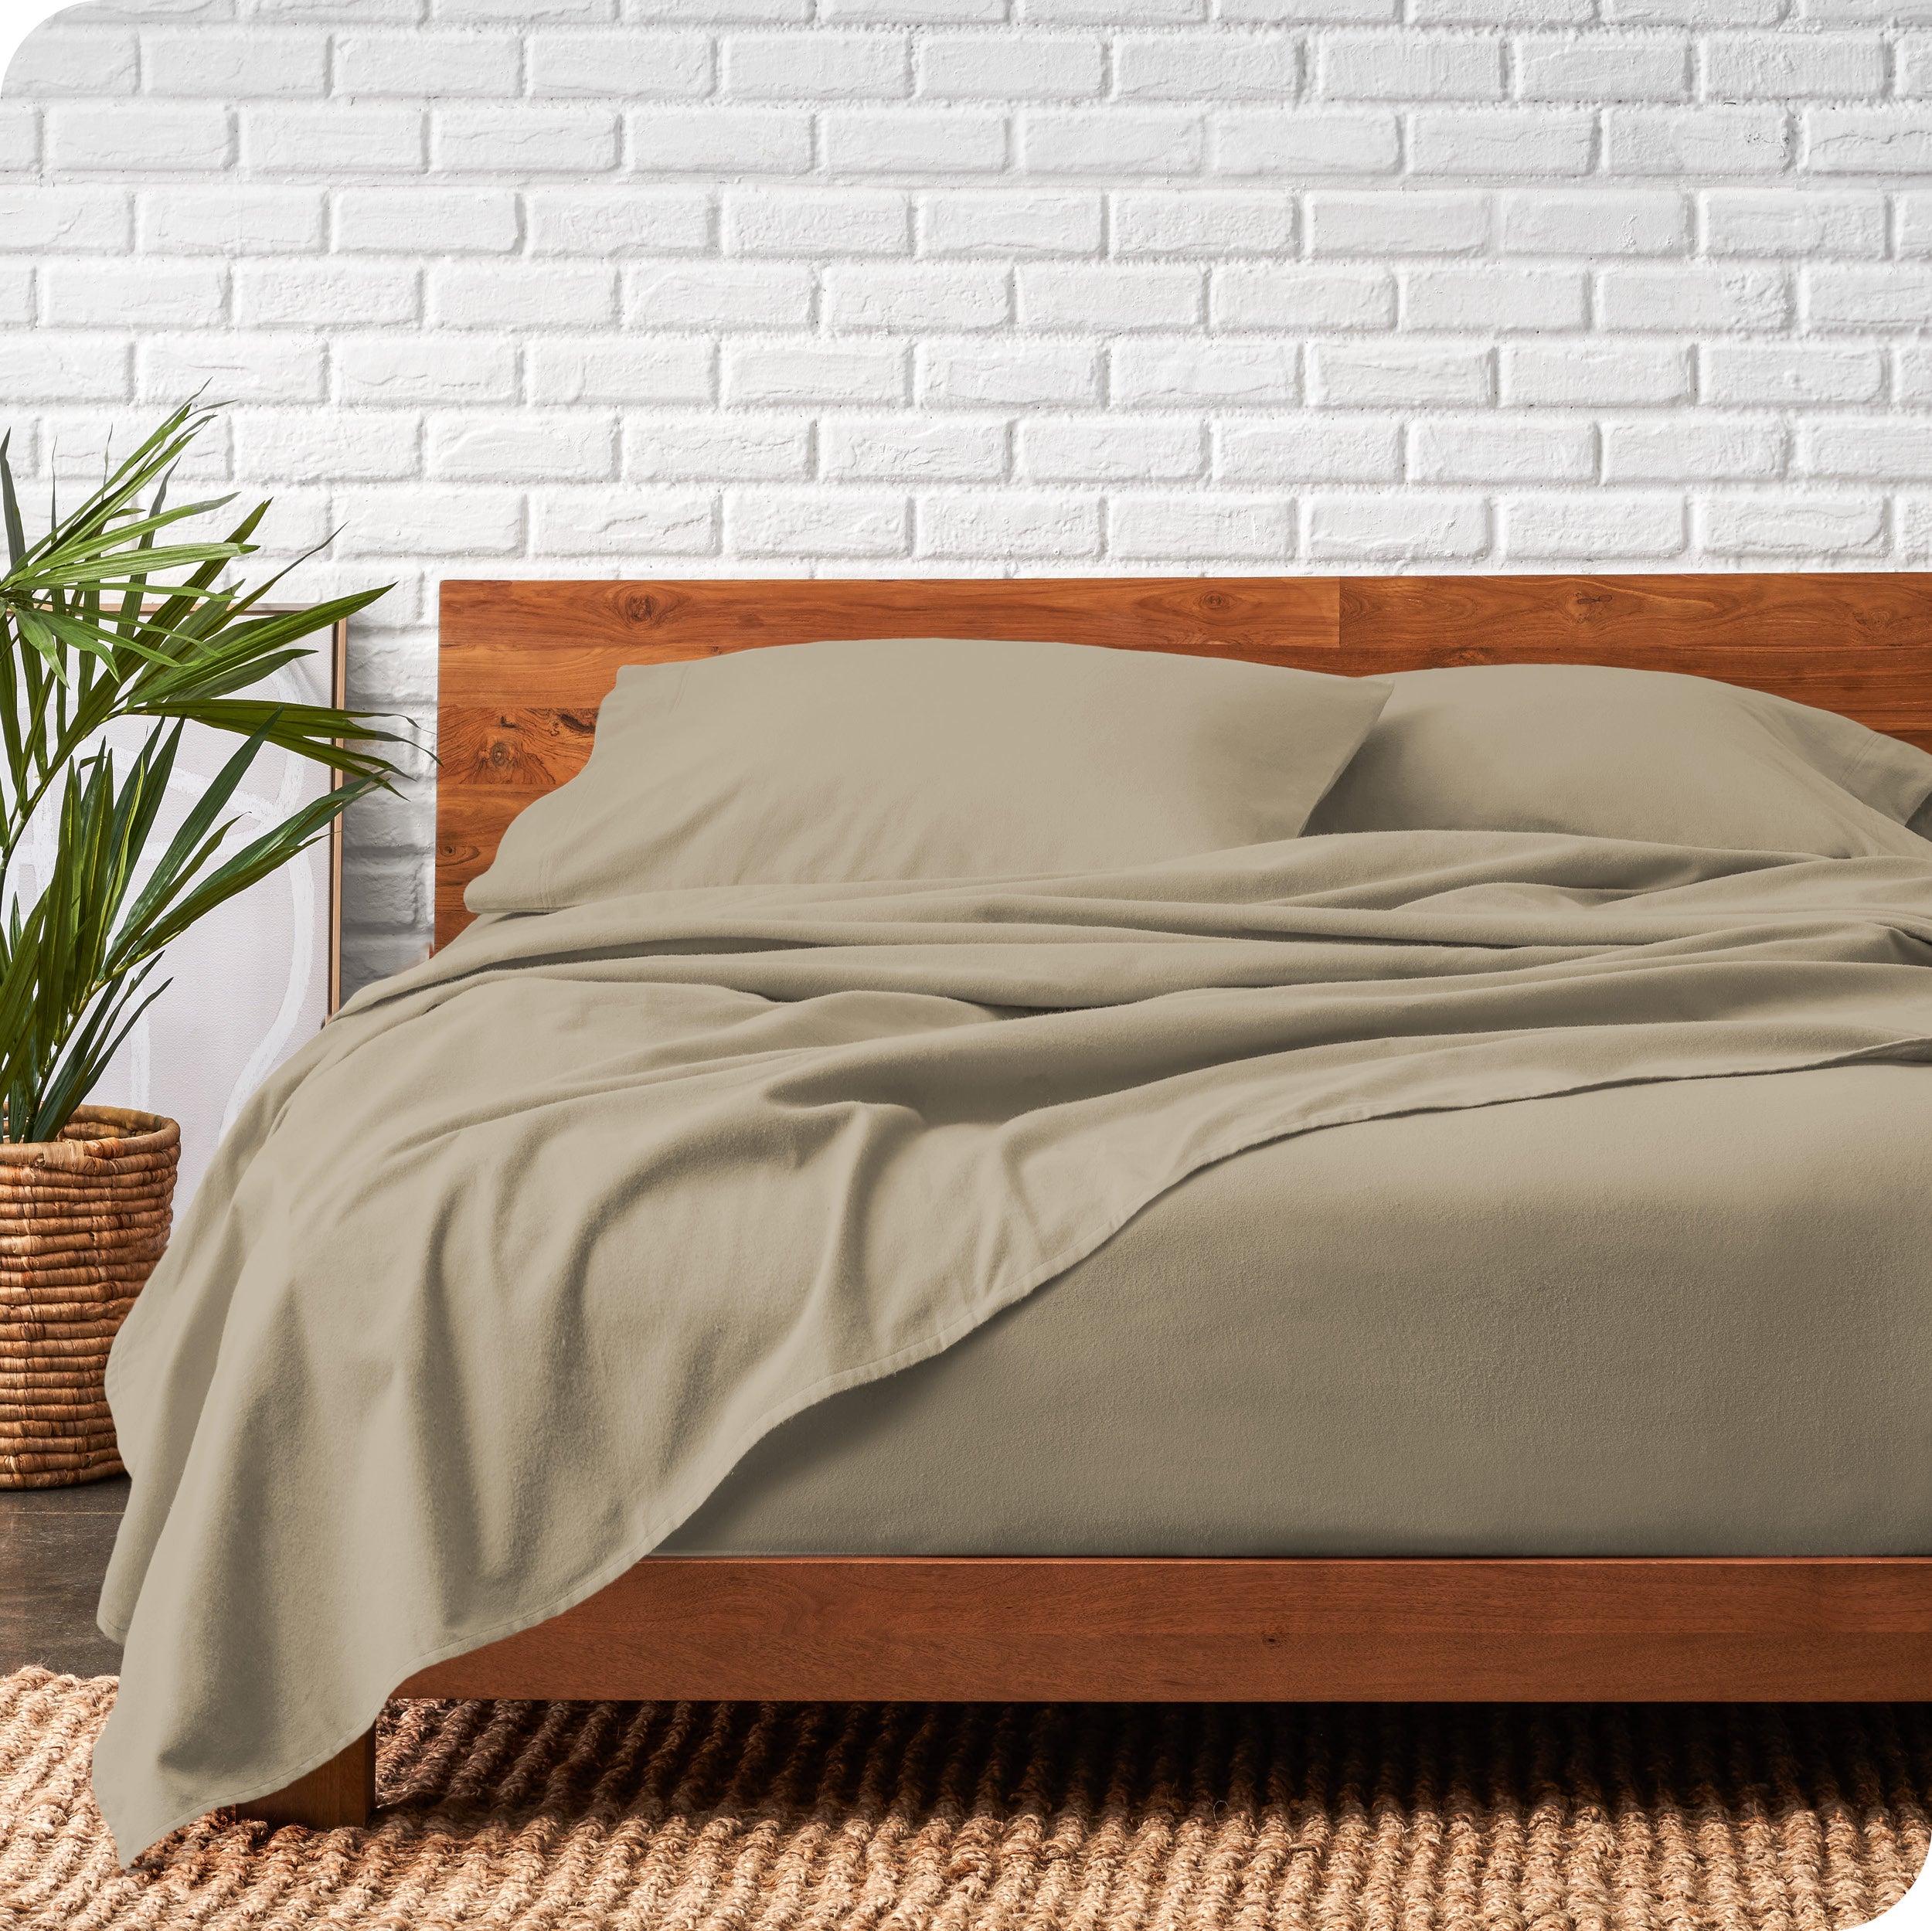 Modern wood bed frame with sand organic flannel sheets and pillowcases